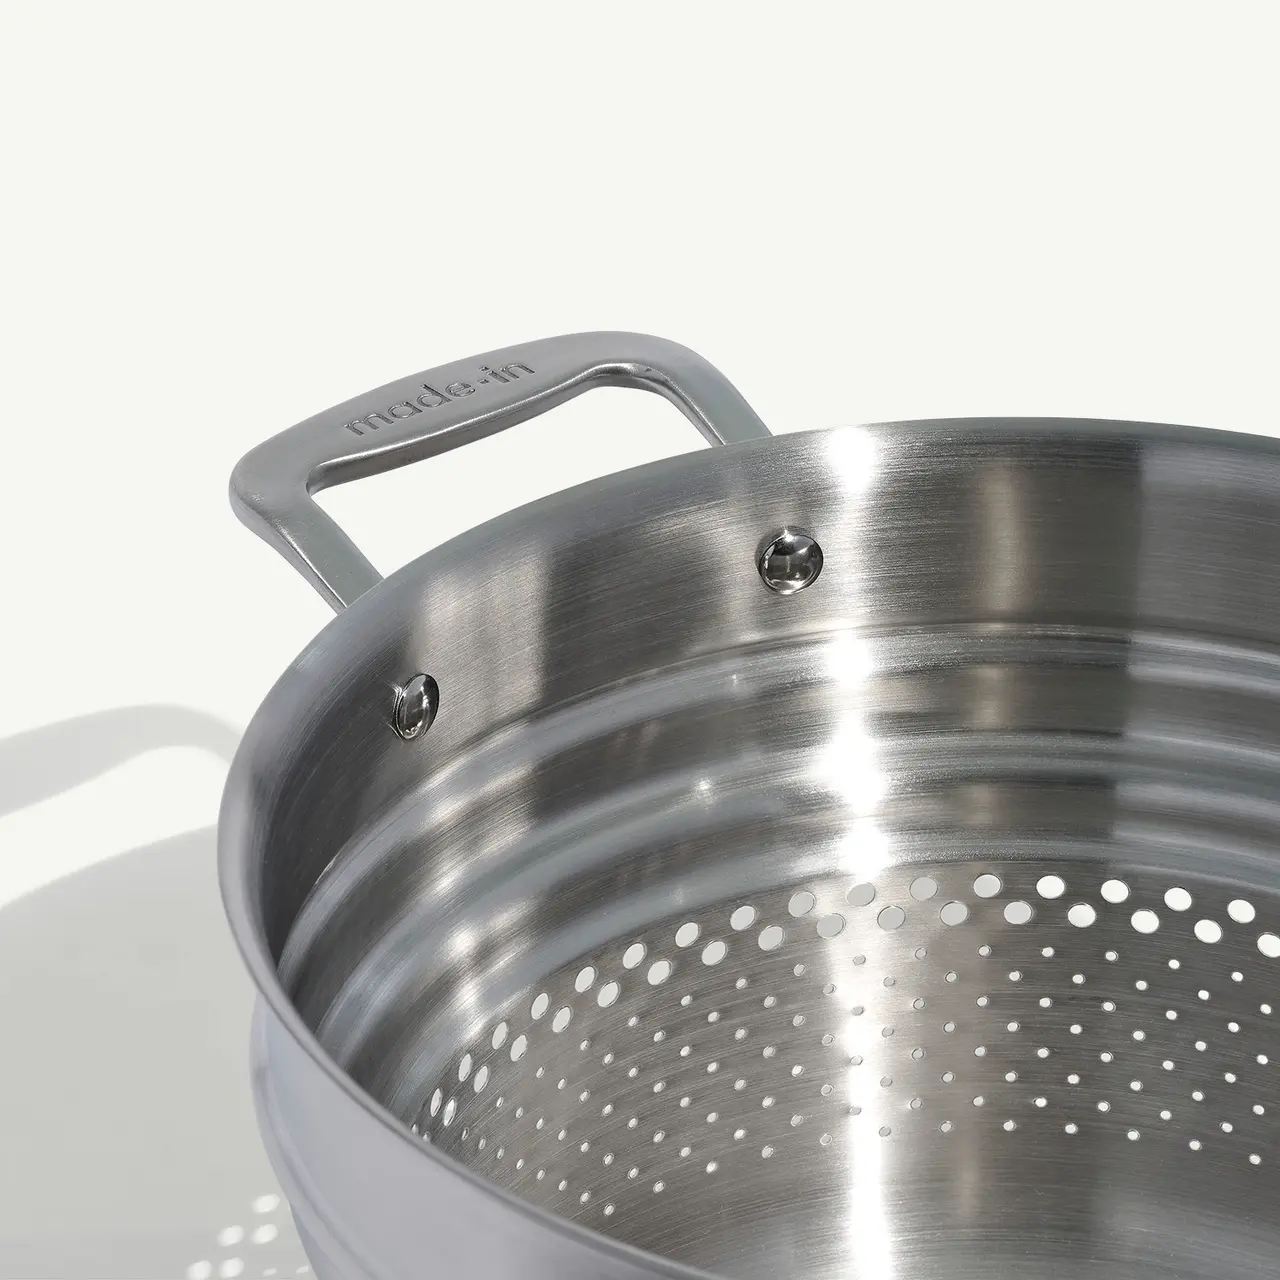 A stainless steel colander with a handle is shown against a white background.